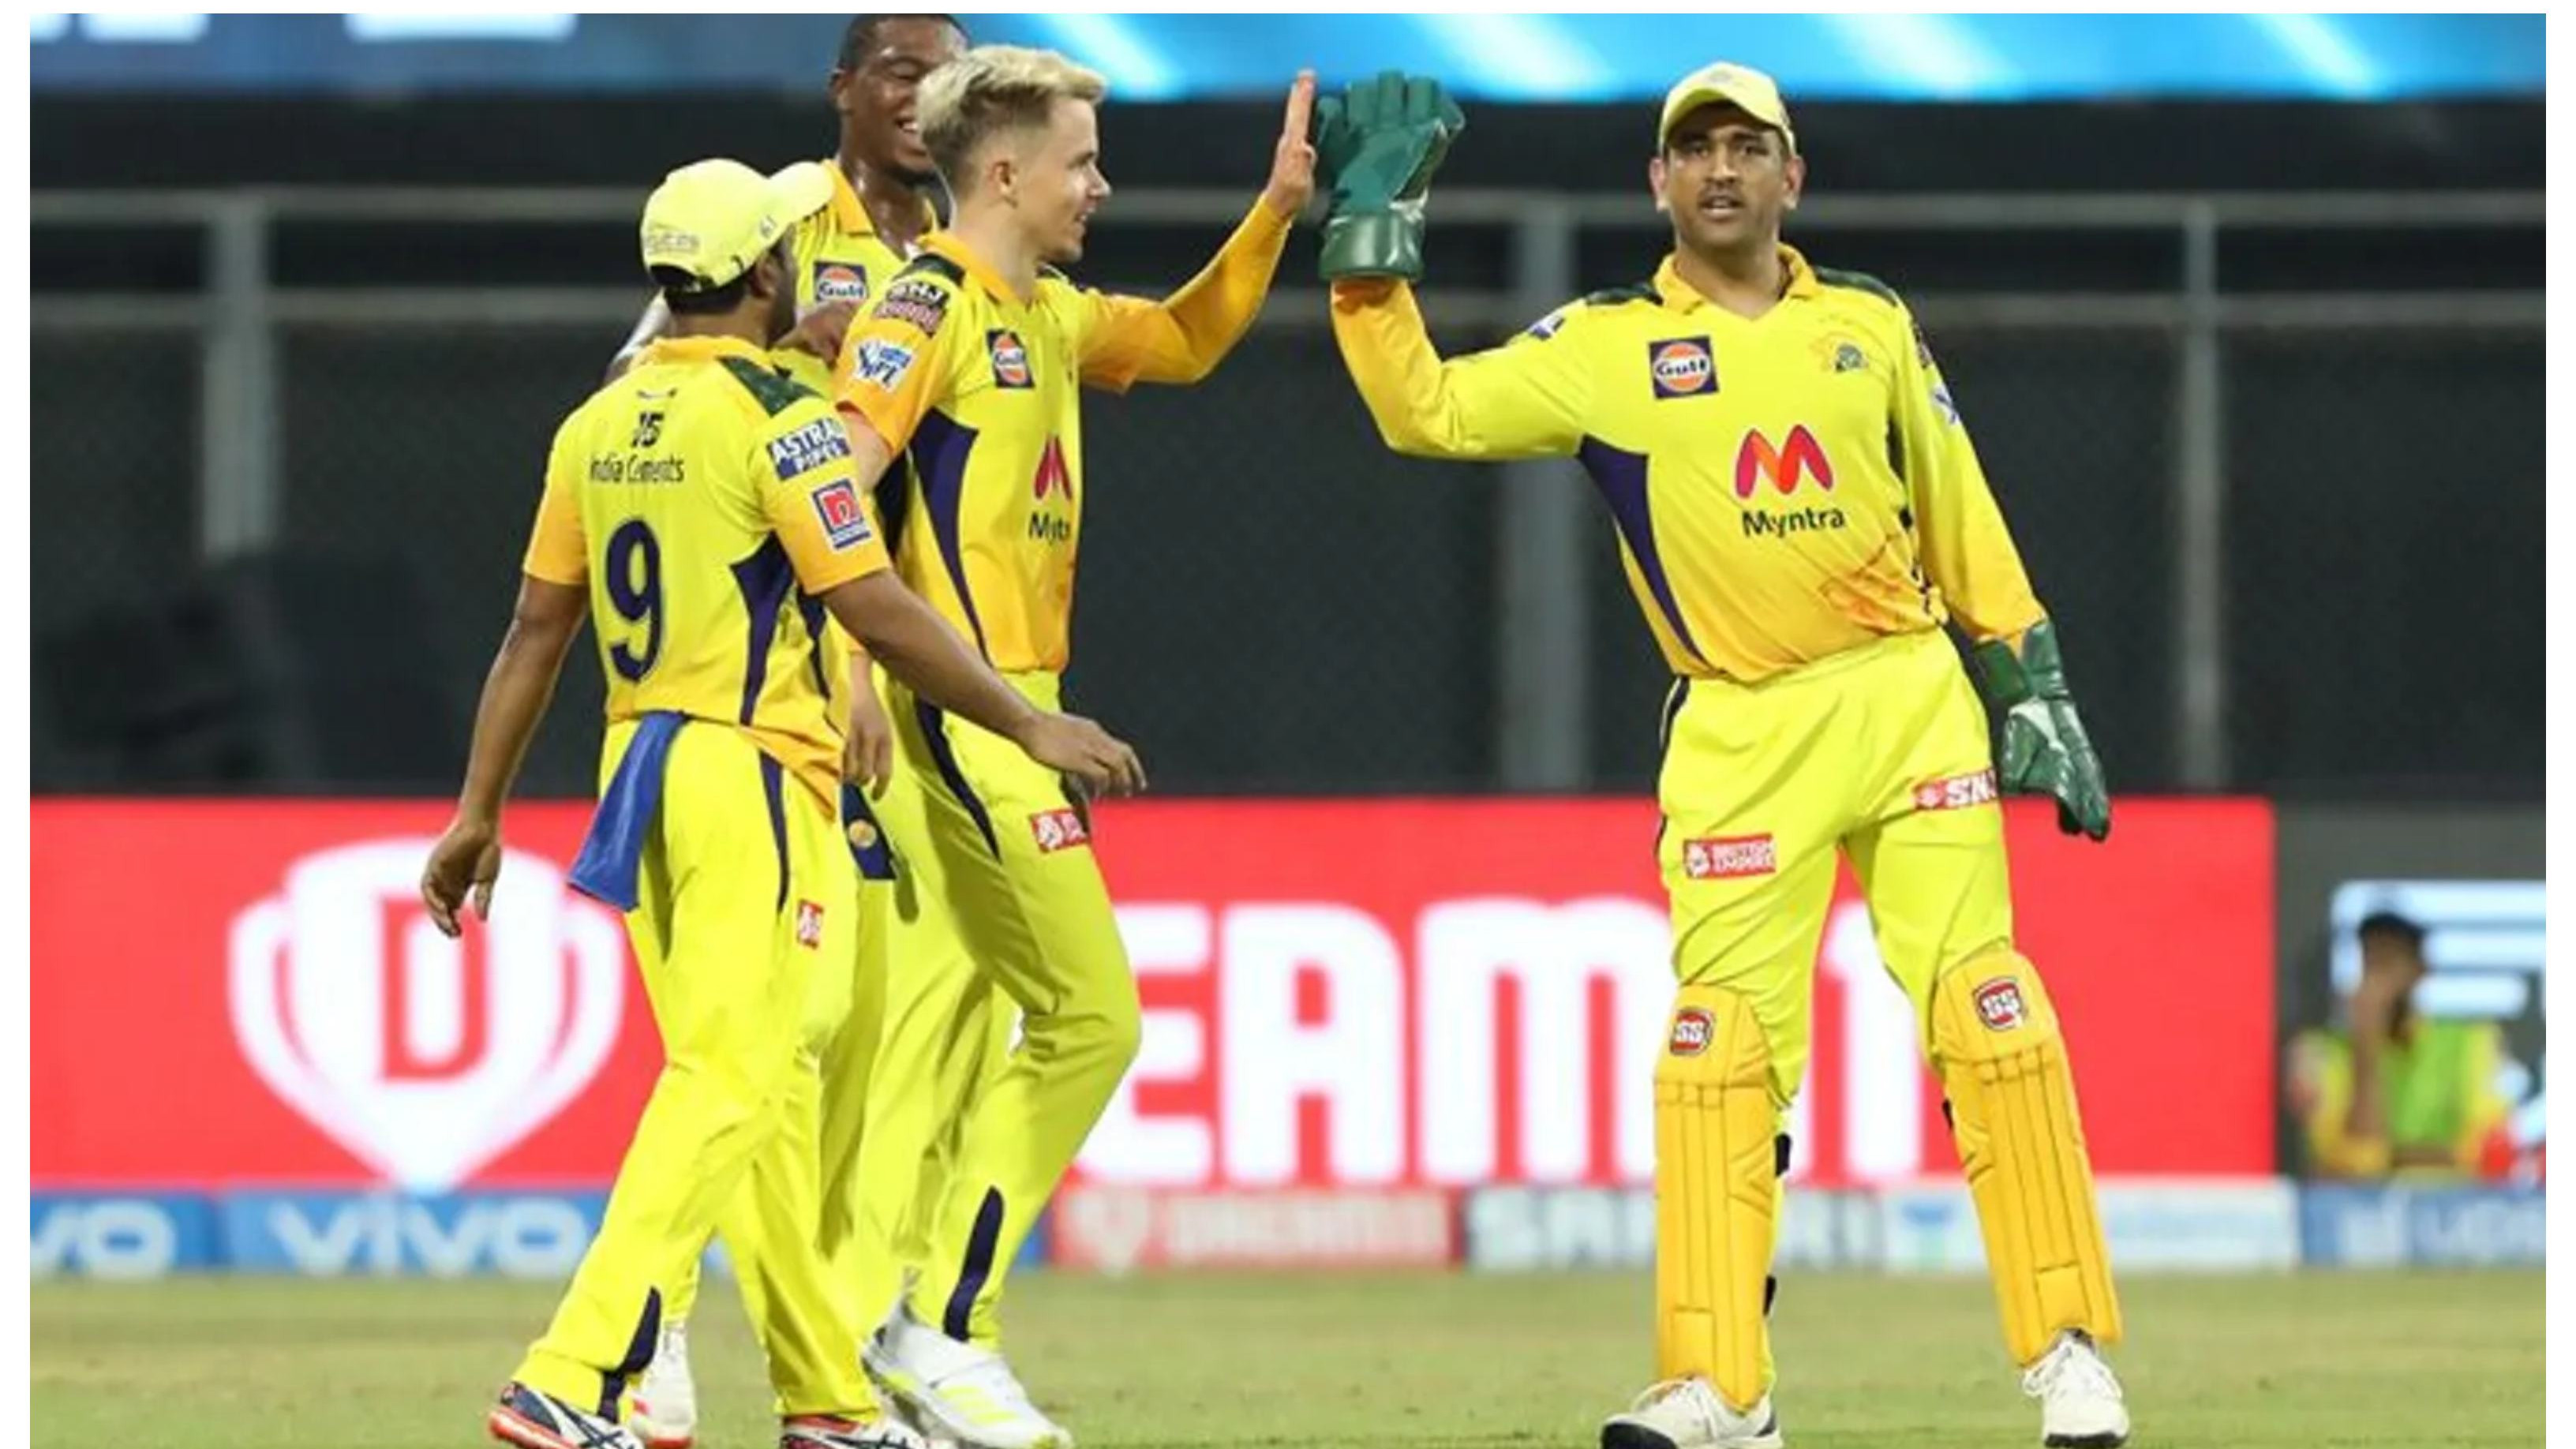 IPL 2021: “Quite easy to stay calm in a game like this”, says MS Dhoni after CSK’s win over KKR